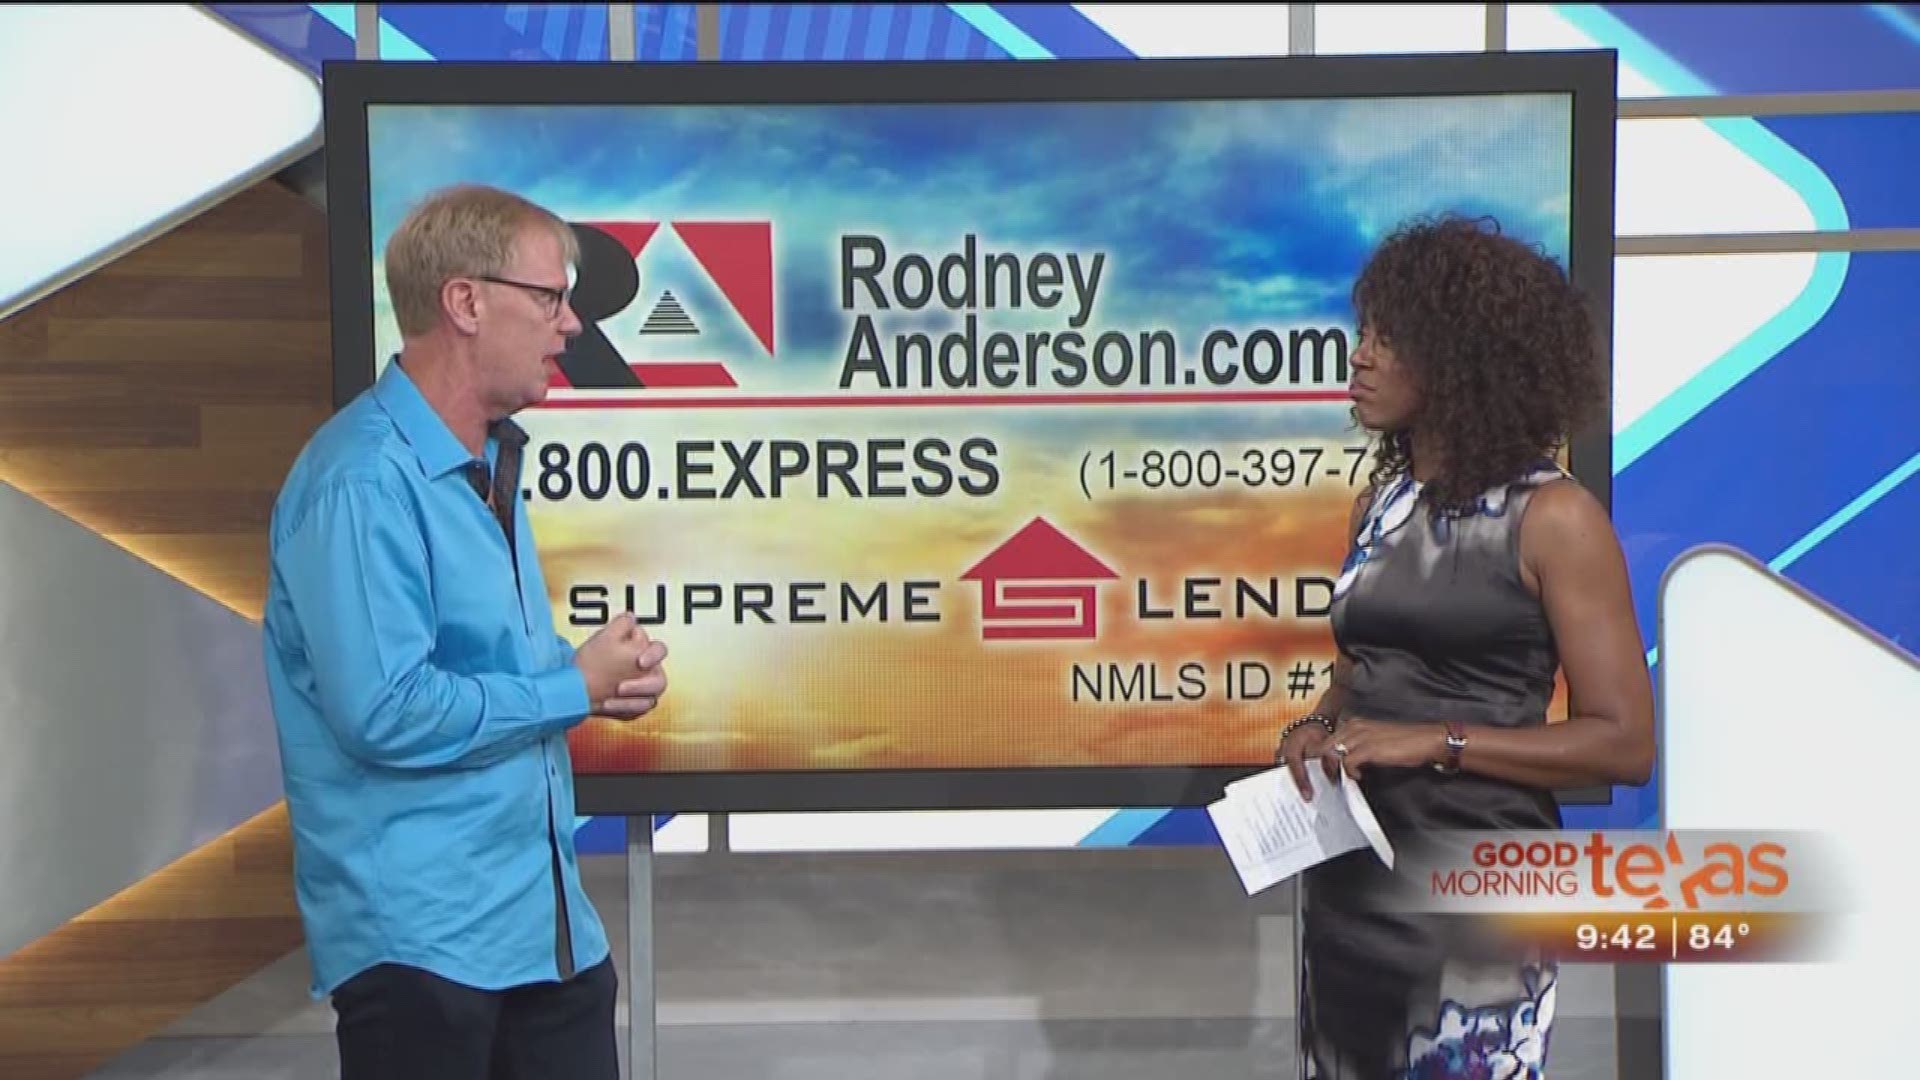 Rodney Anderson has solutions for your debt